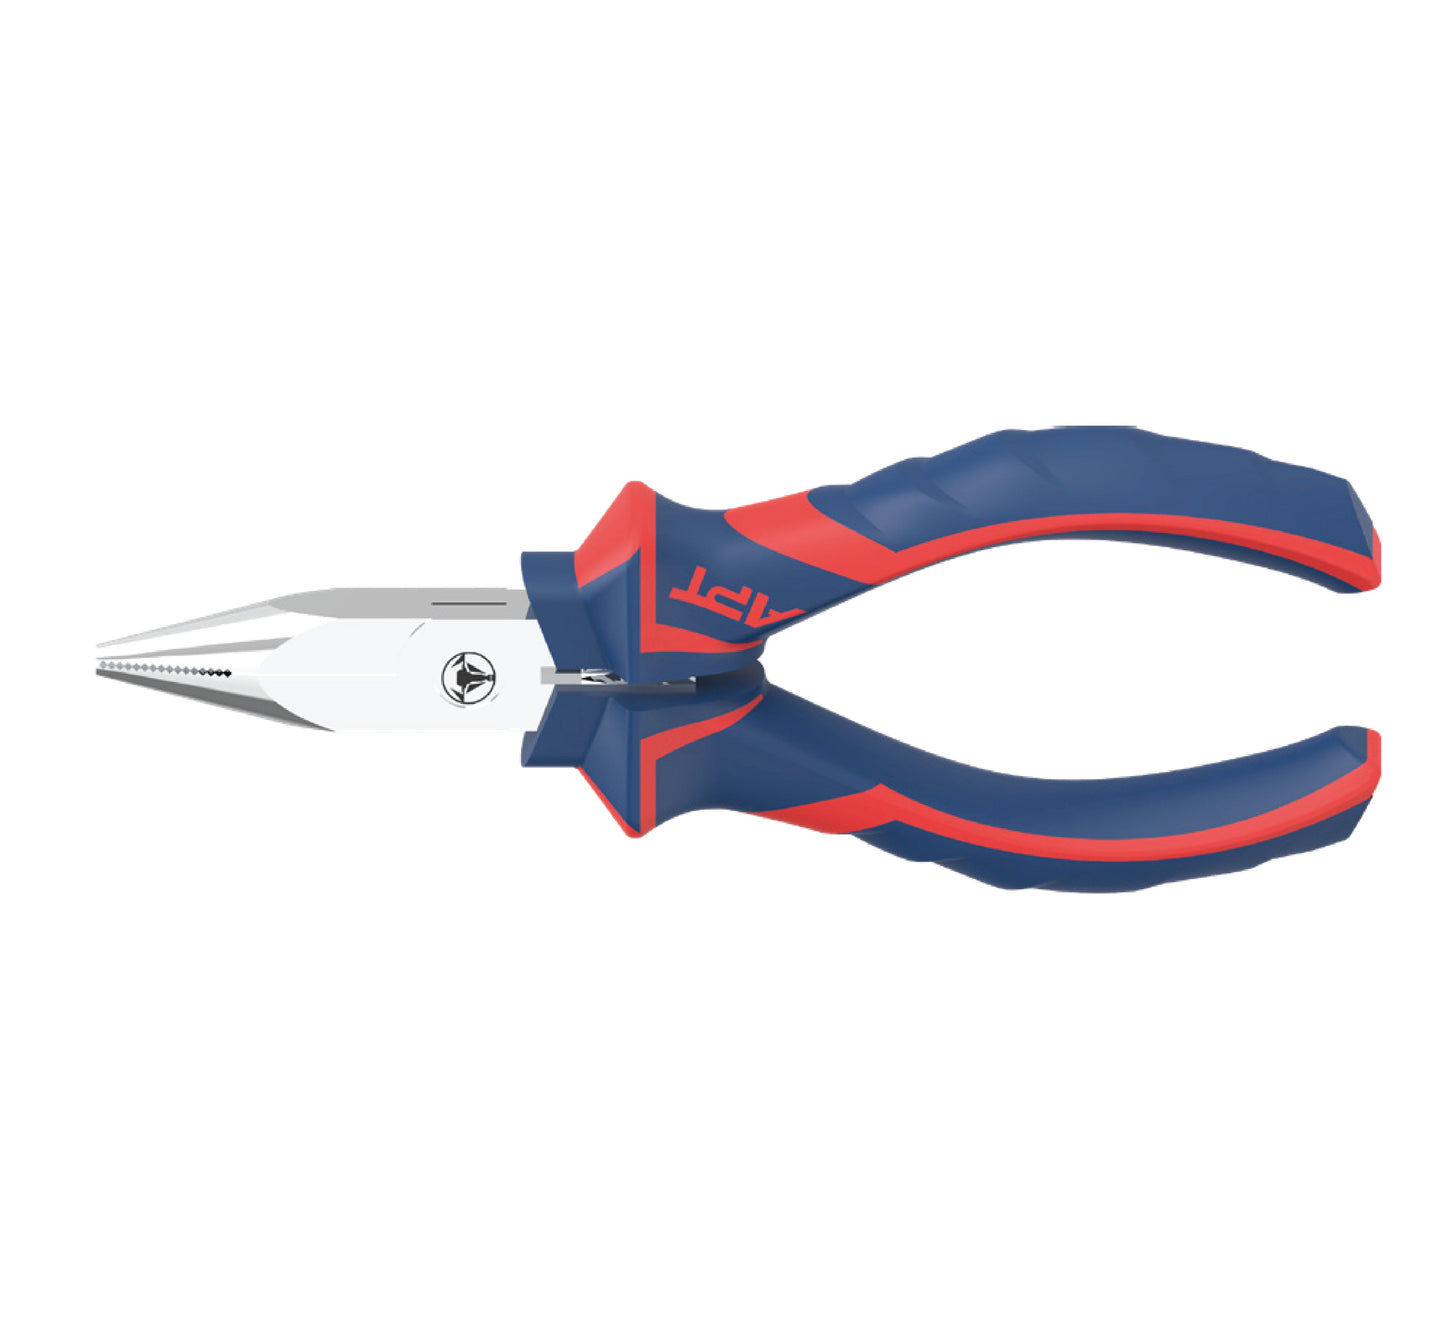 APT MINI LONG NOSE PLIER 4.5" NEW APT 2 COLOR HANDLE-NEW APT PP CARD WITH RED STRAP-AH1437540-115A AH1437540-115A